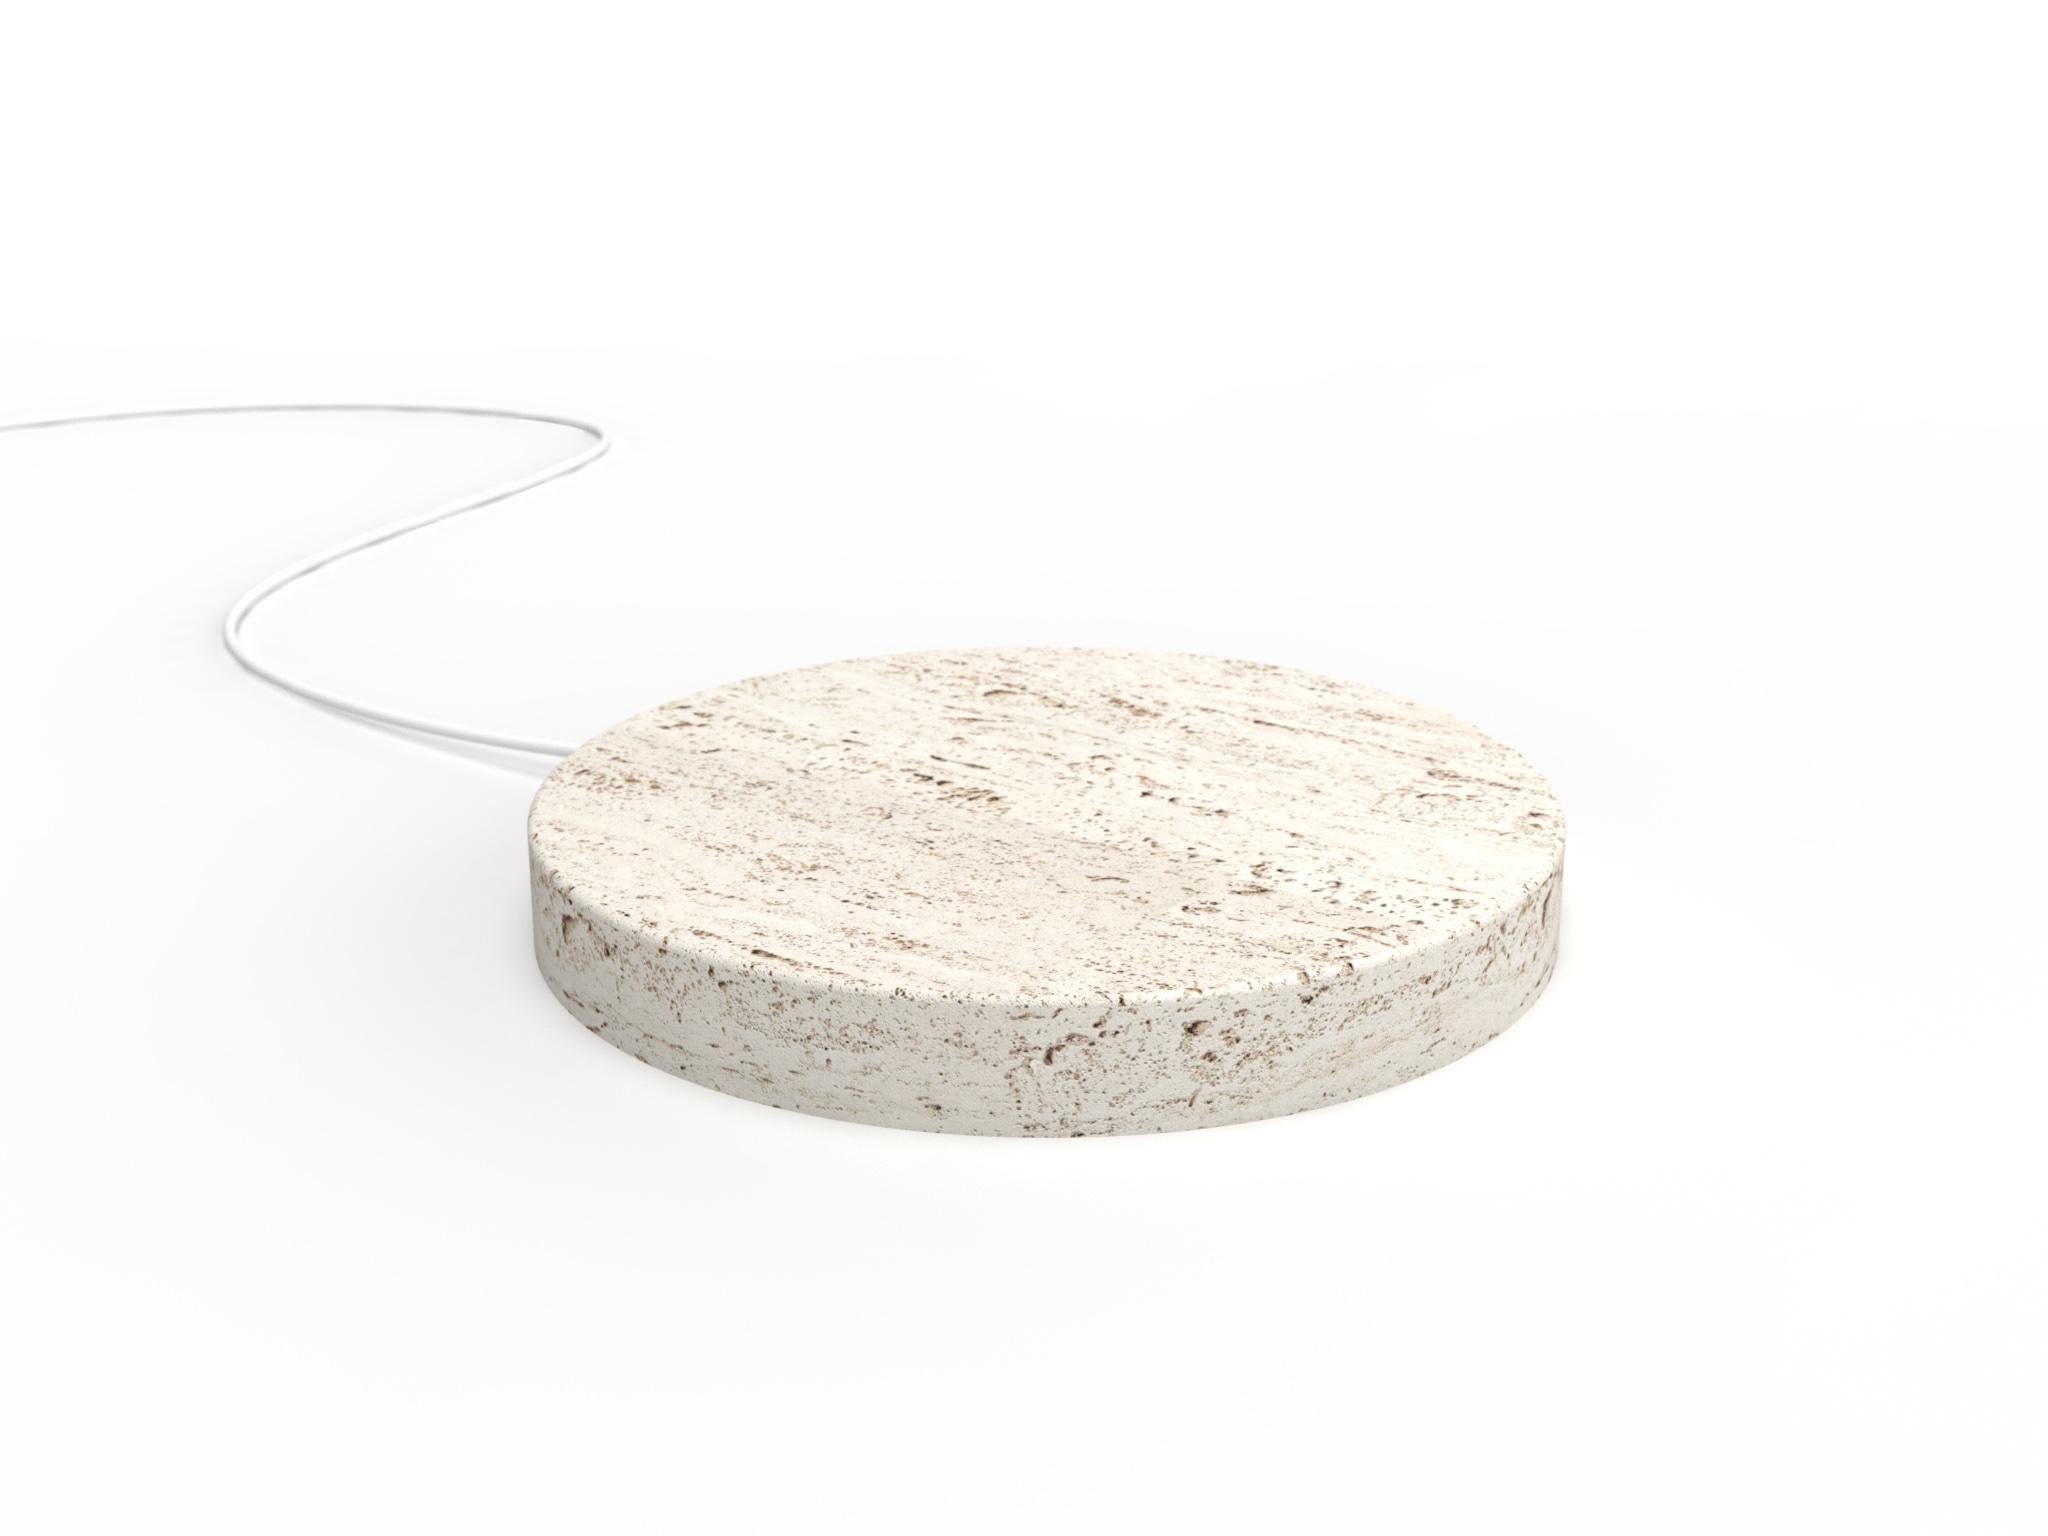 A travertine base,
that quickly charge your phone, with a touch of magic.
 
A circle,
a stone,
realized with the care that stone requires.

A powerful wireless charging technology ensures an efficient and reliable power delivery.

The result is a